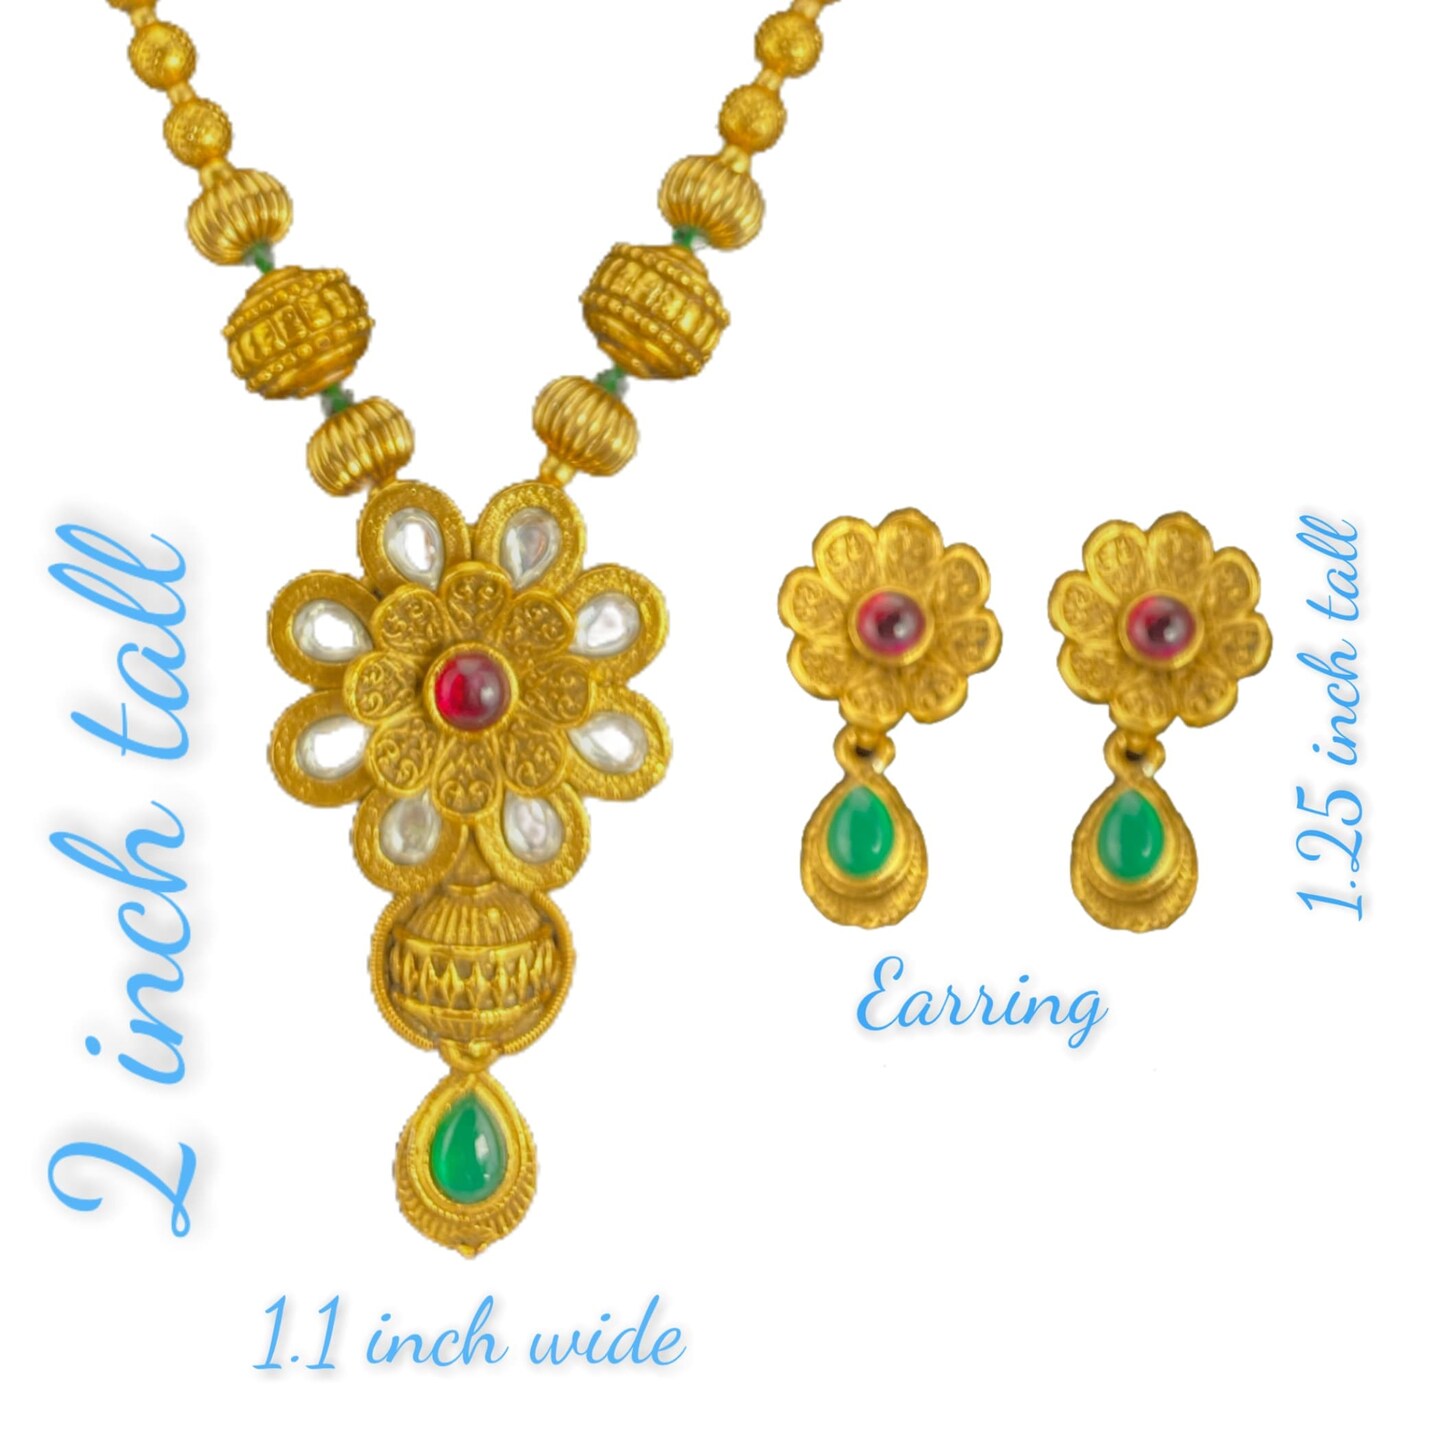 South Indian And Pakistan Pendant Jewelry Set &#x2013; Matte Gold Plating Antique Ethnic Necklace And Earrings Jewelry Set